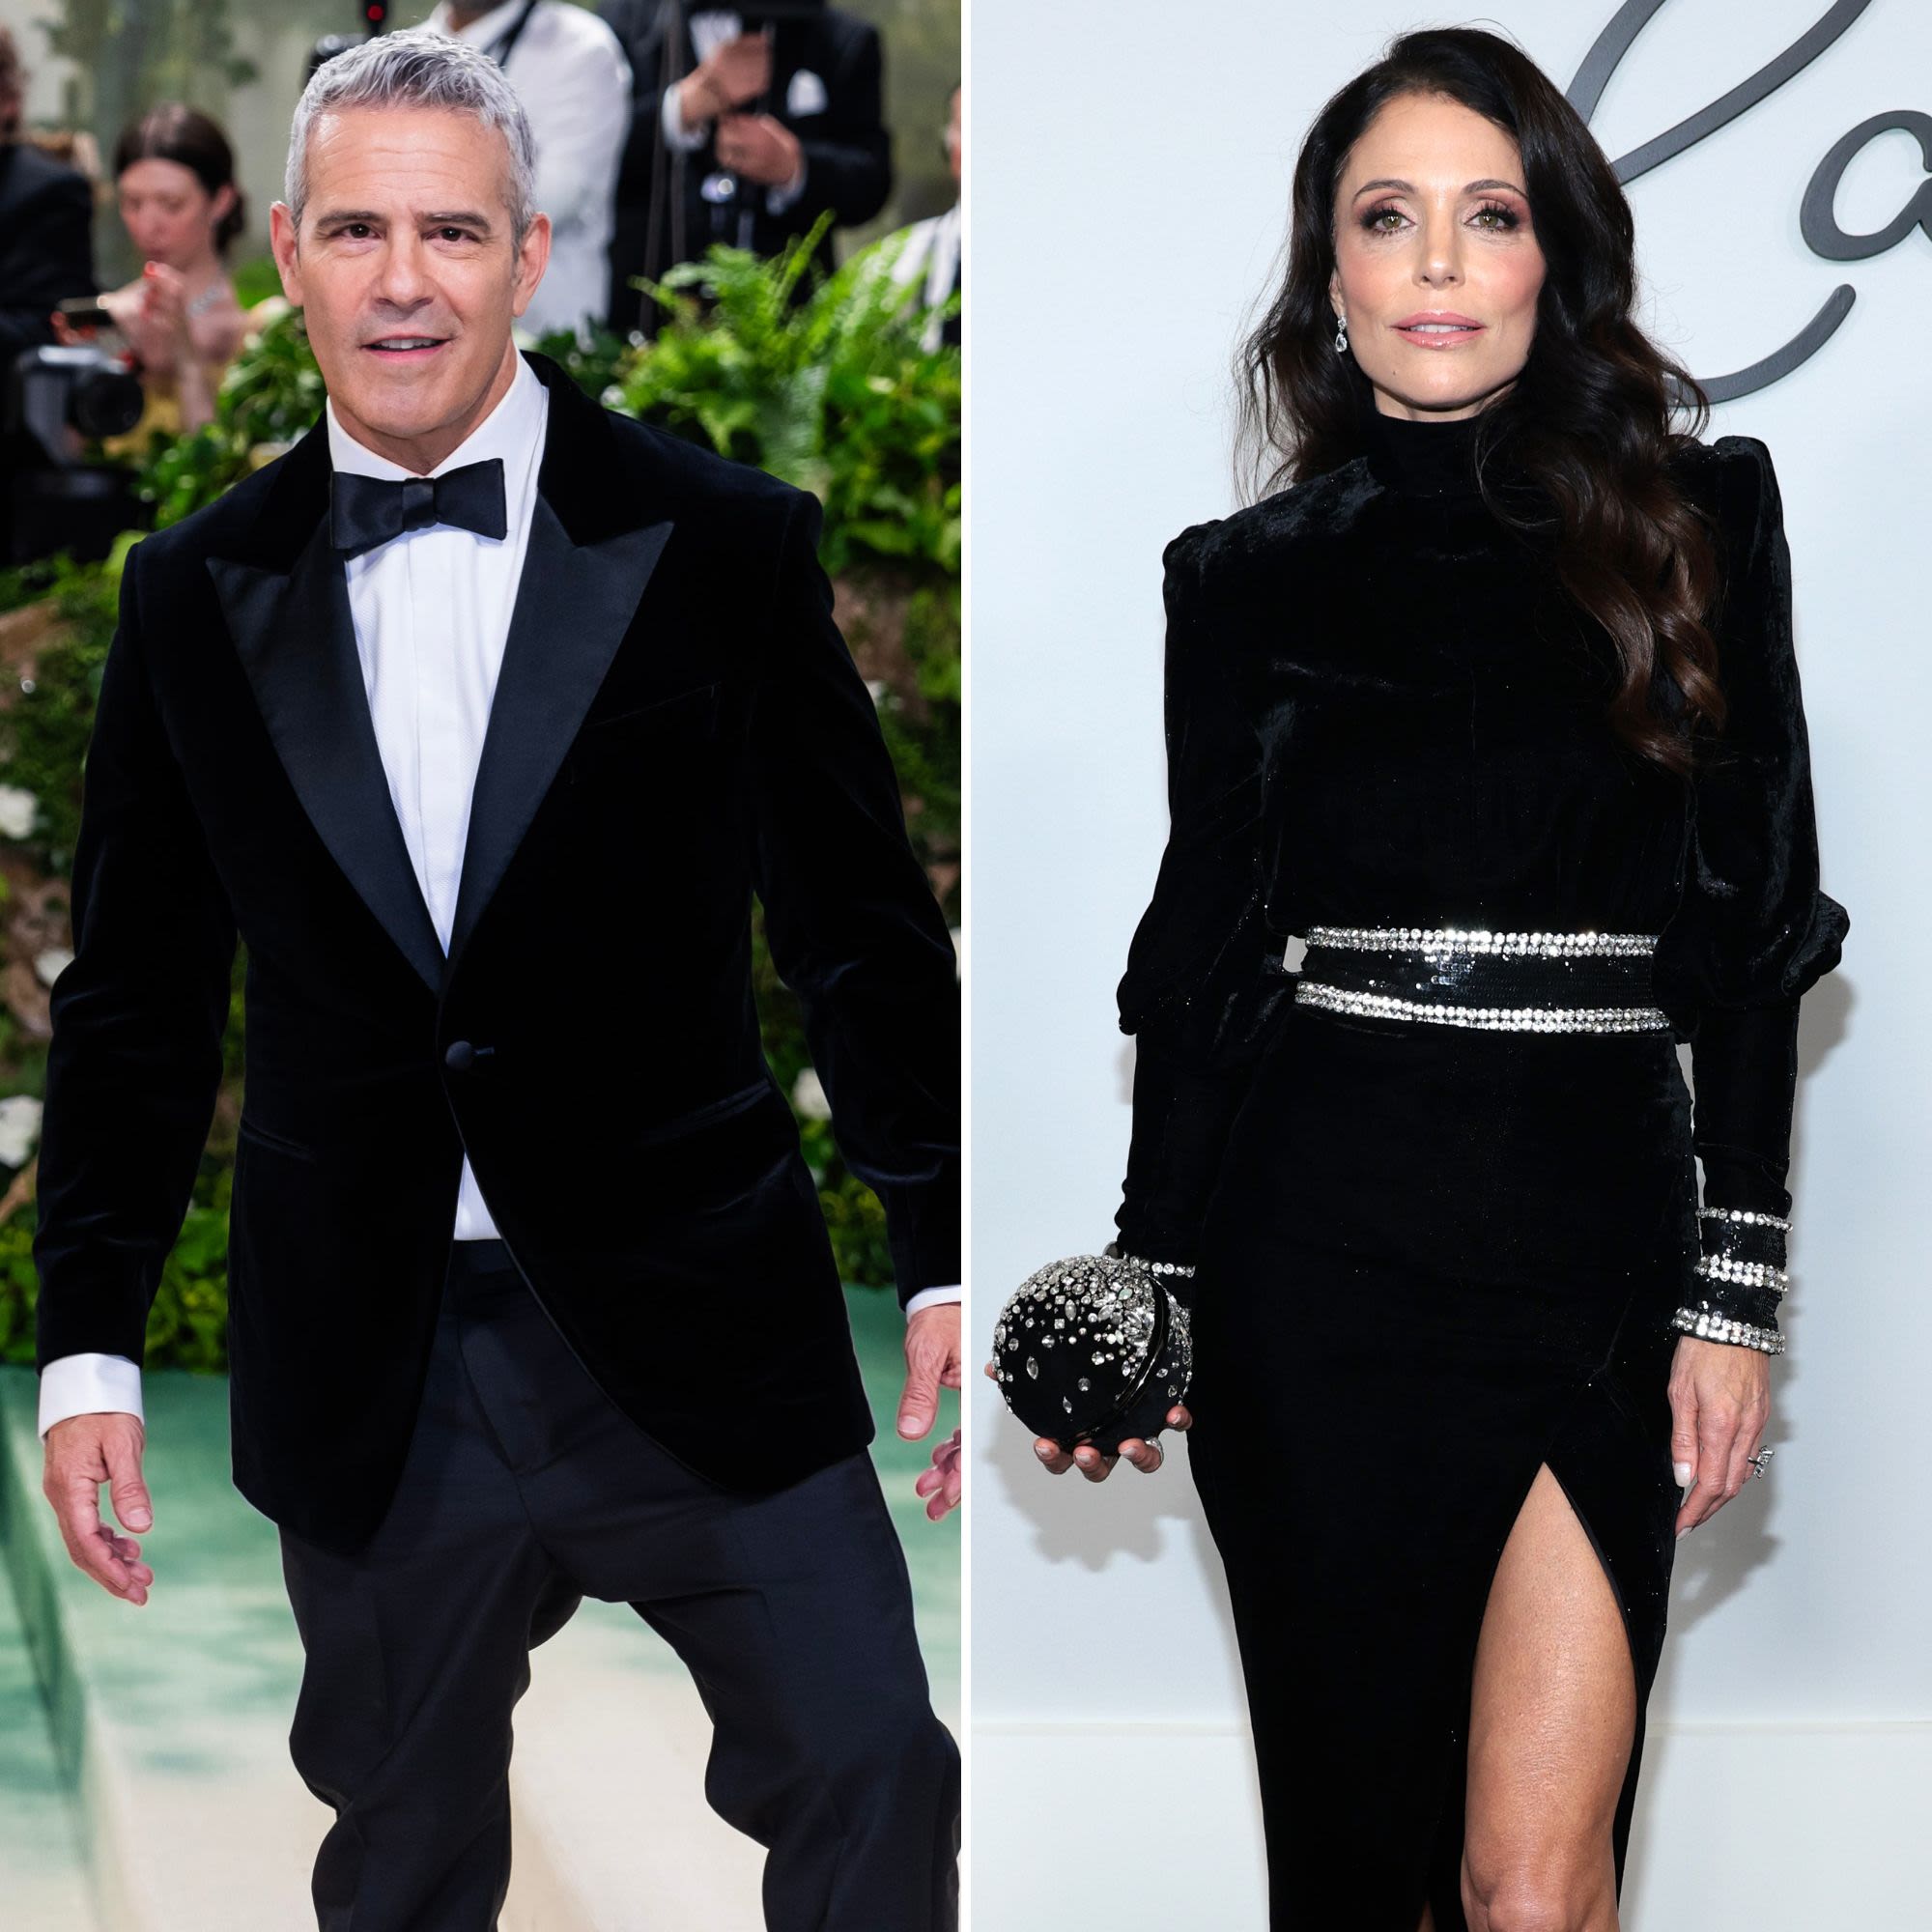 Bethenny Frankel vs Andy Cohen: Real Housewives Cast Members ‘Felt They Had to Pick a Side’